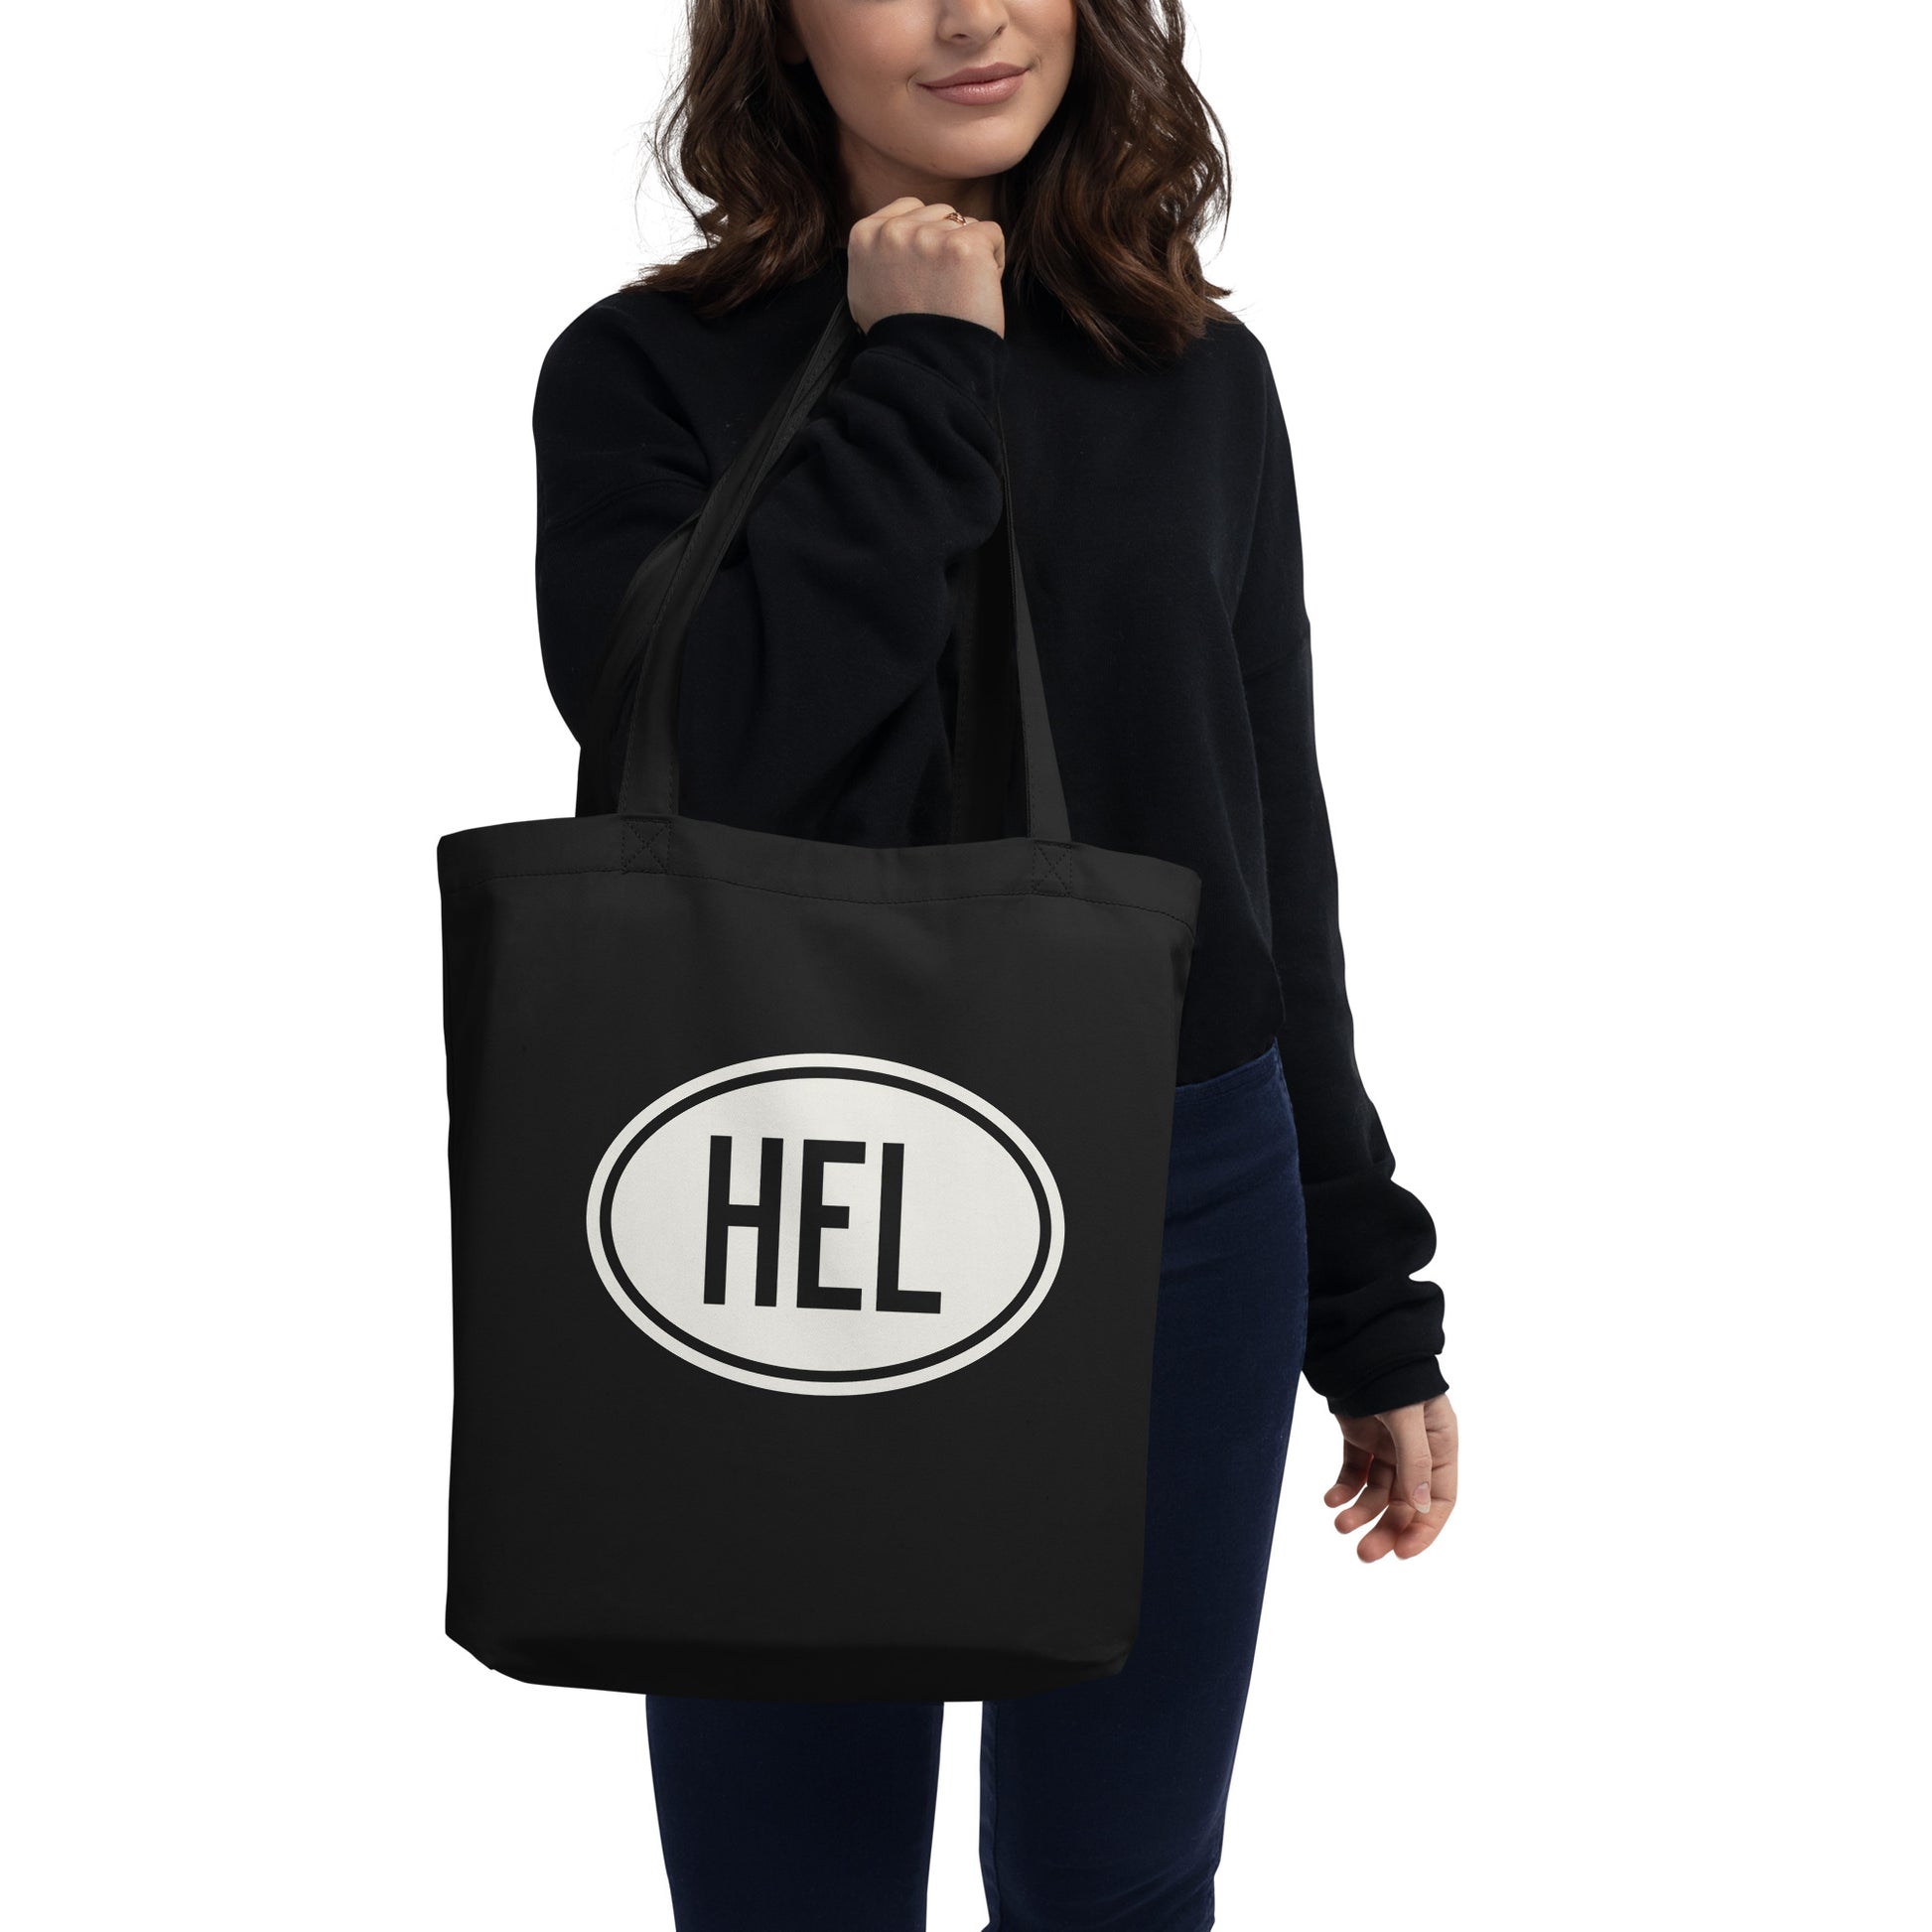 Unique Travel Gift Organic Tote - White Oval • HEL Helsinki • YHM Designs - Image 03